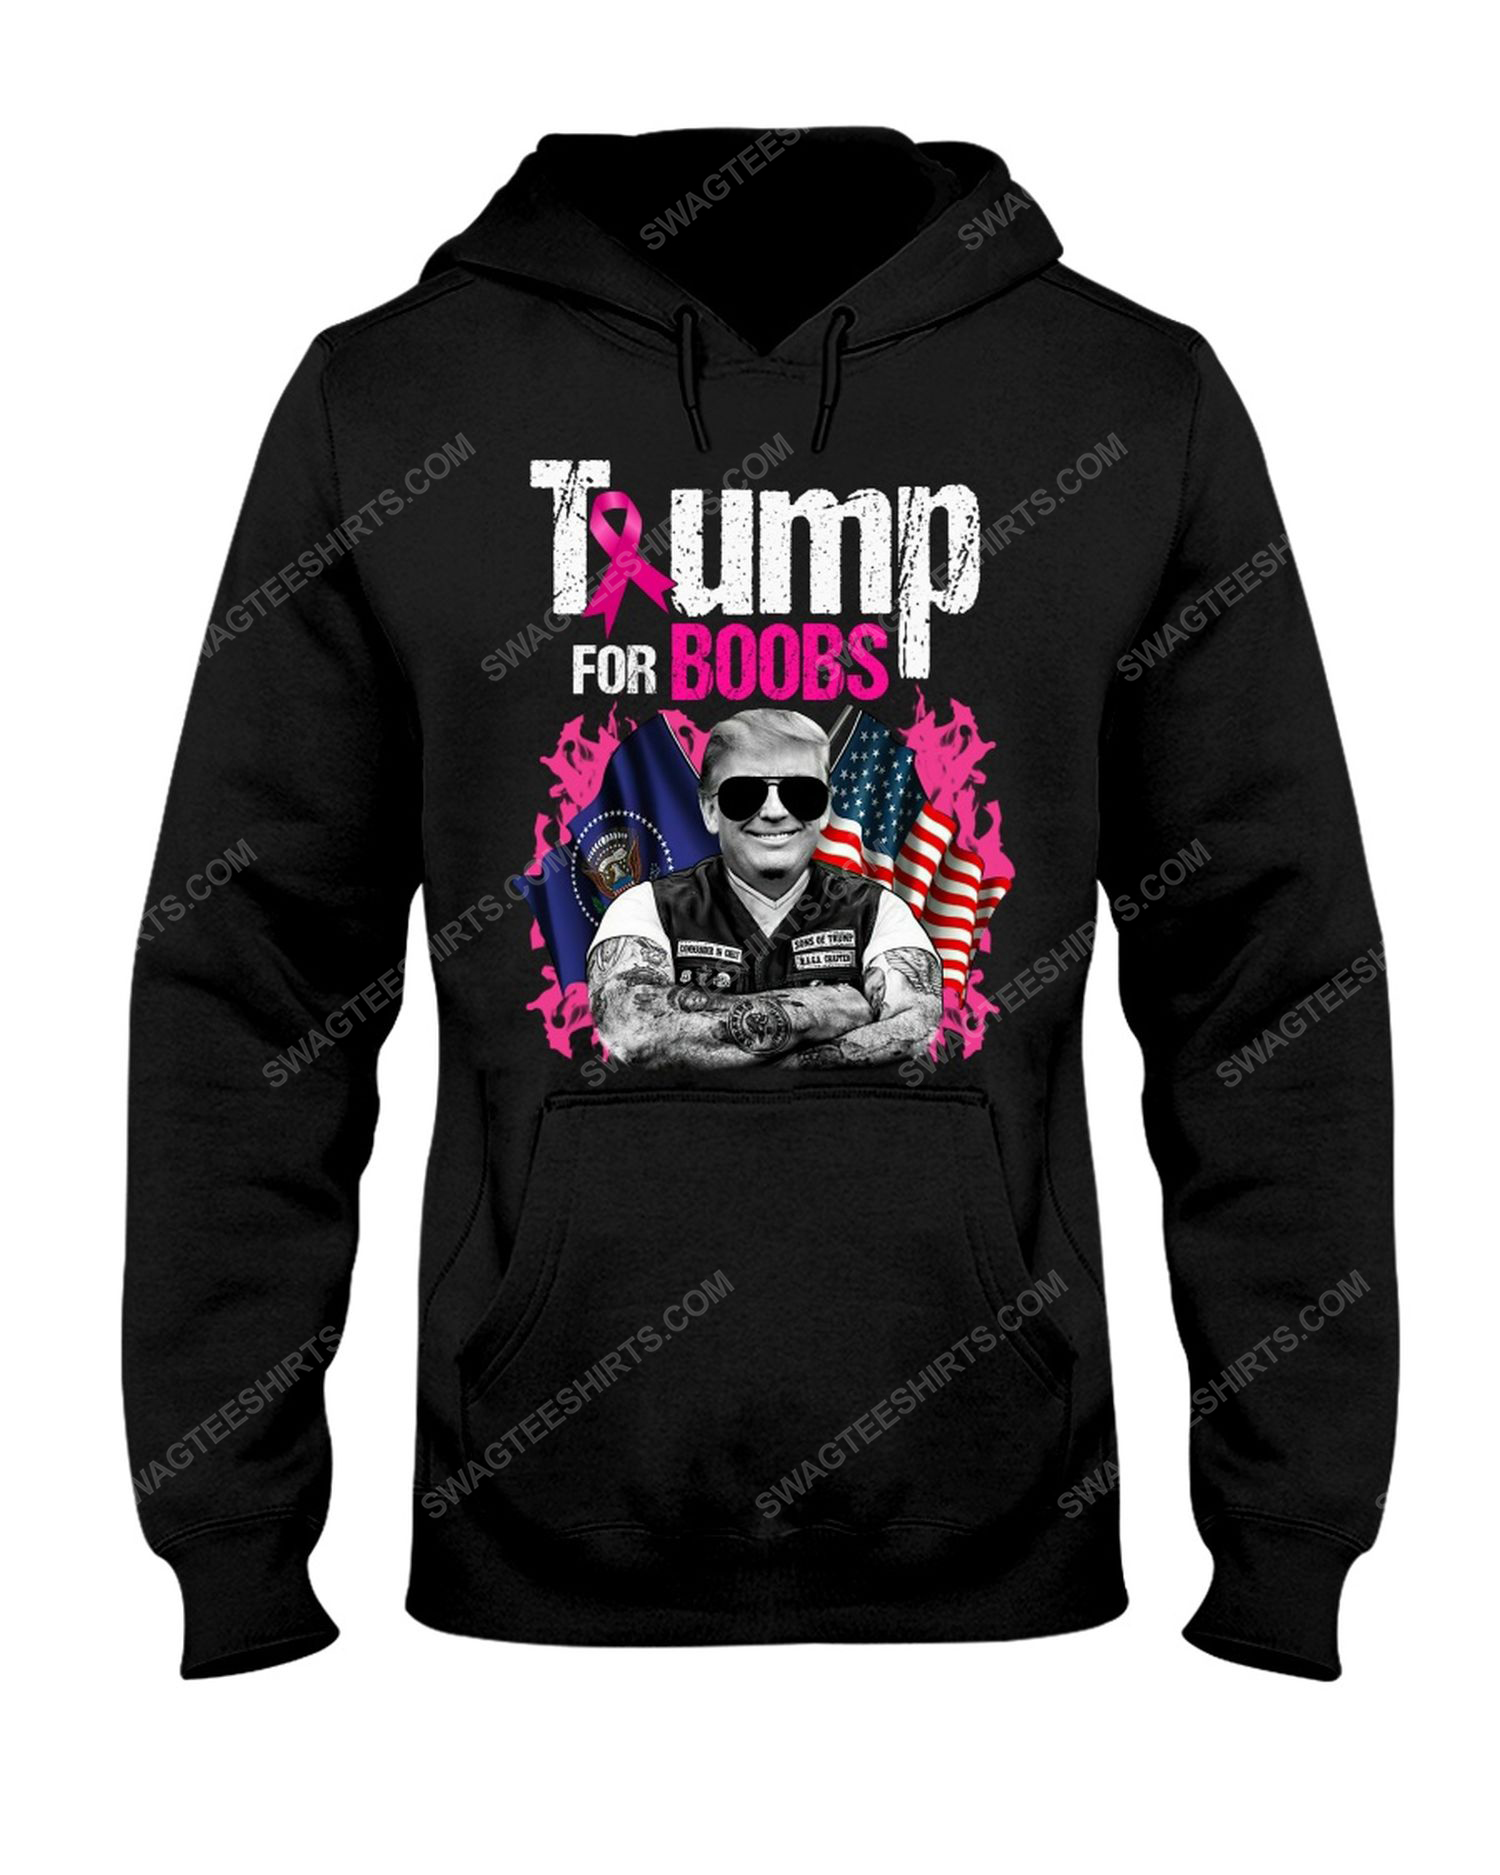 Trump for boobs breast cancer awareness hoodie